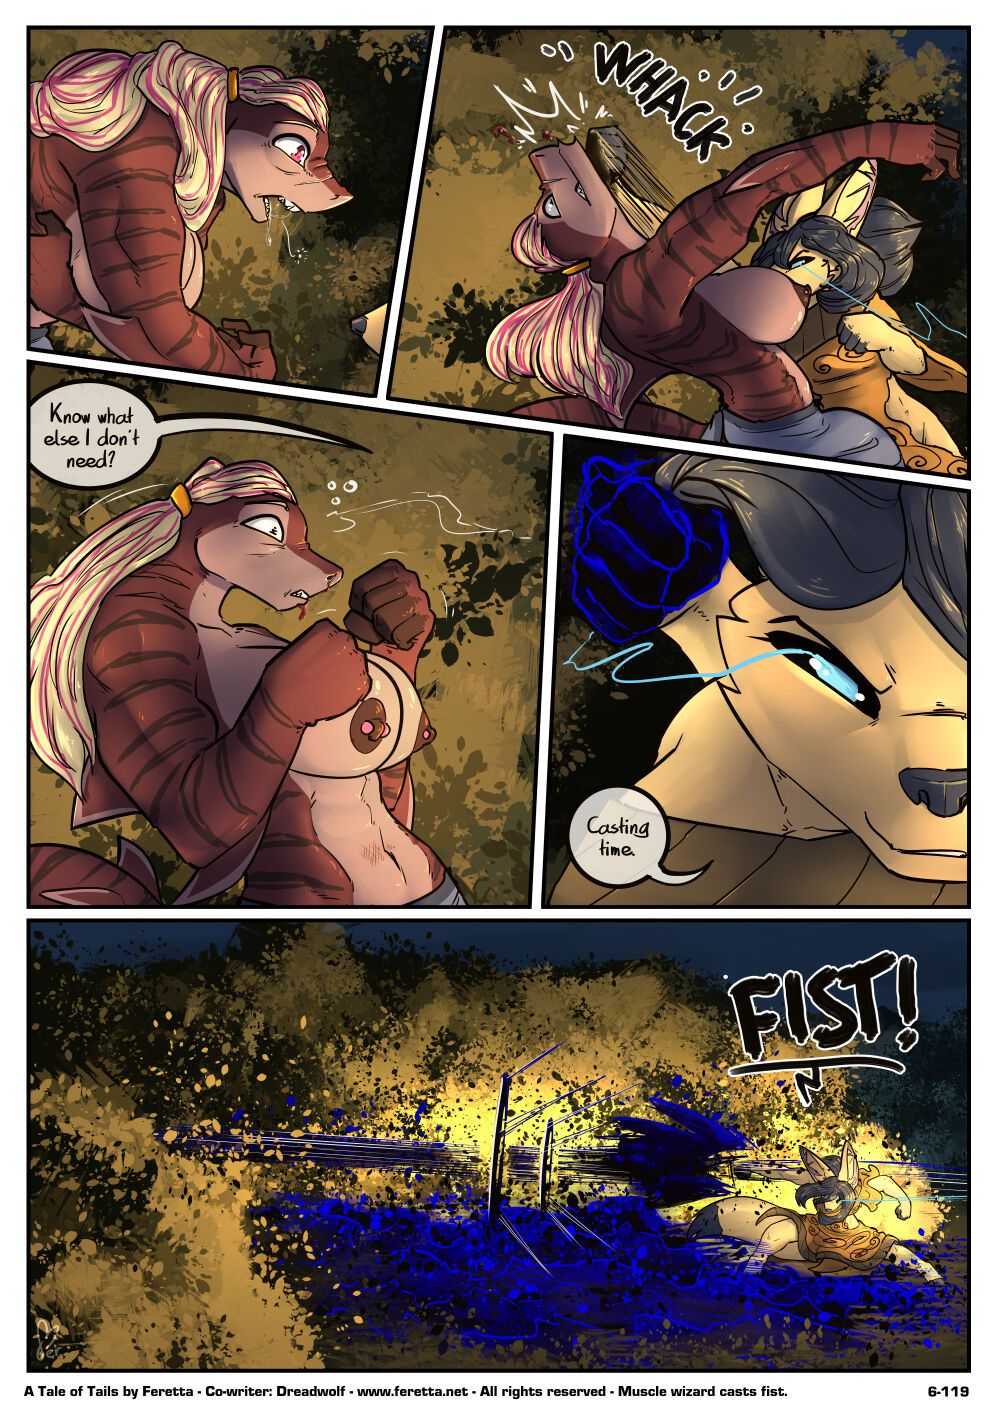 [Feretta] Farellian Legends: A Tale of Tails (w/Extras) [Ongoing] 412